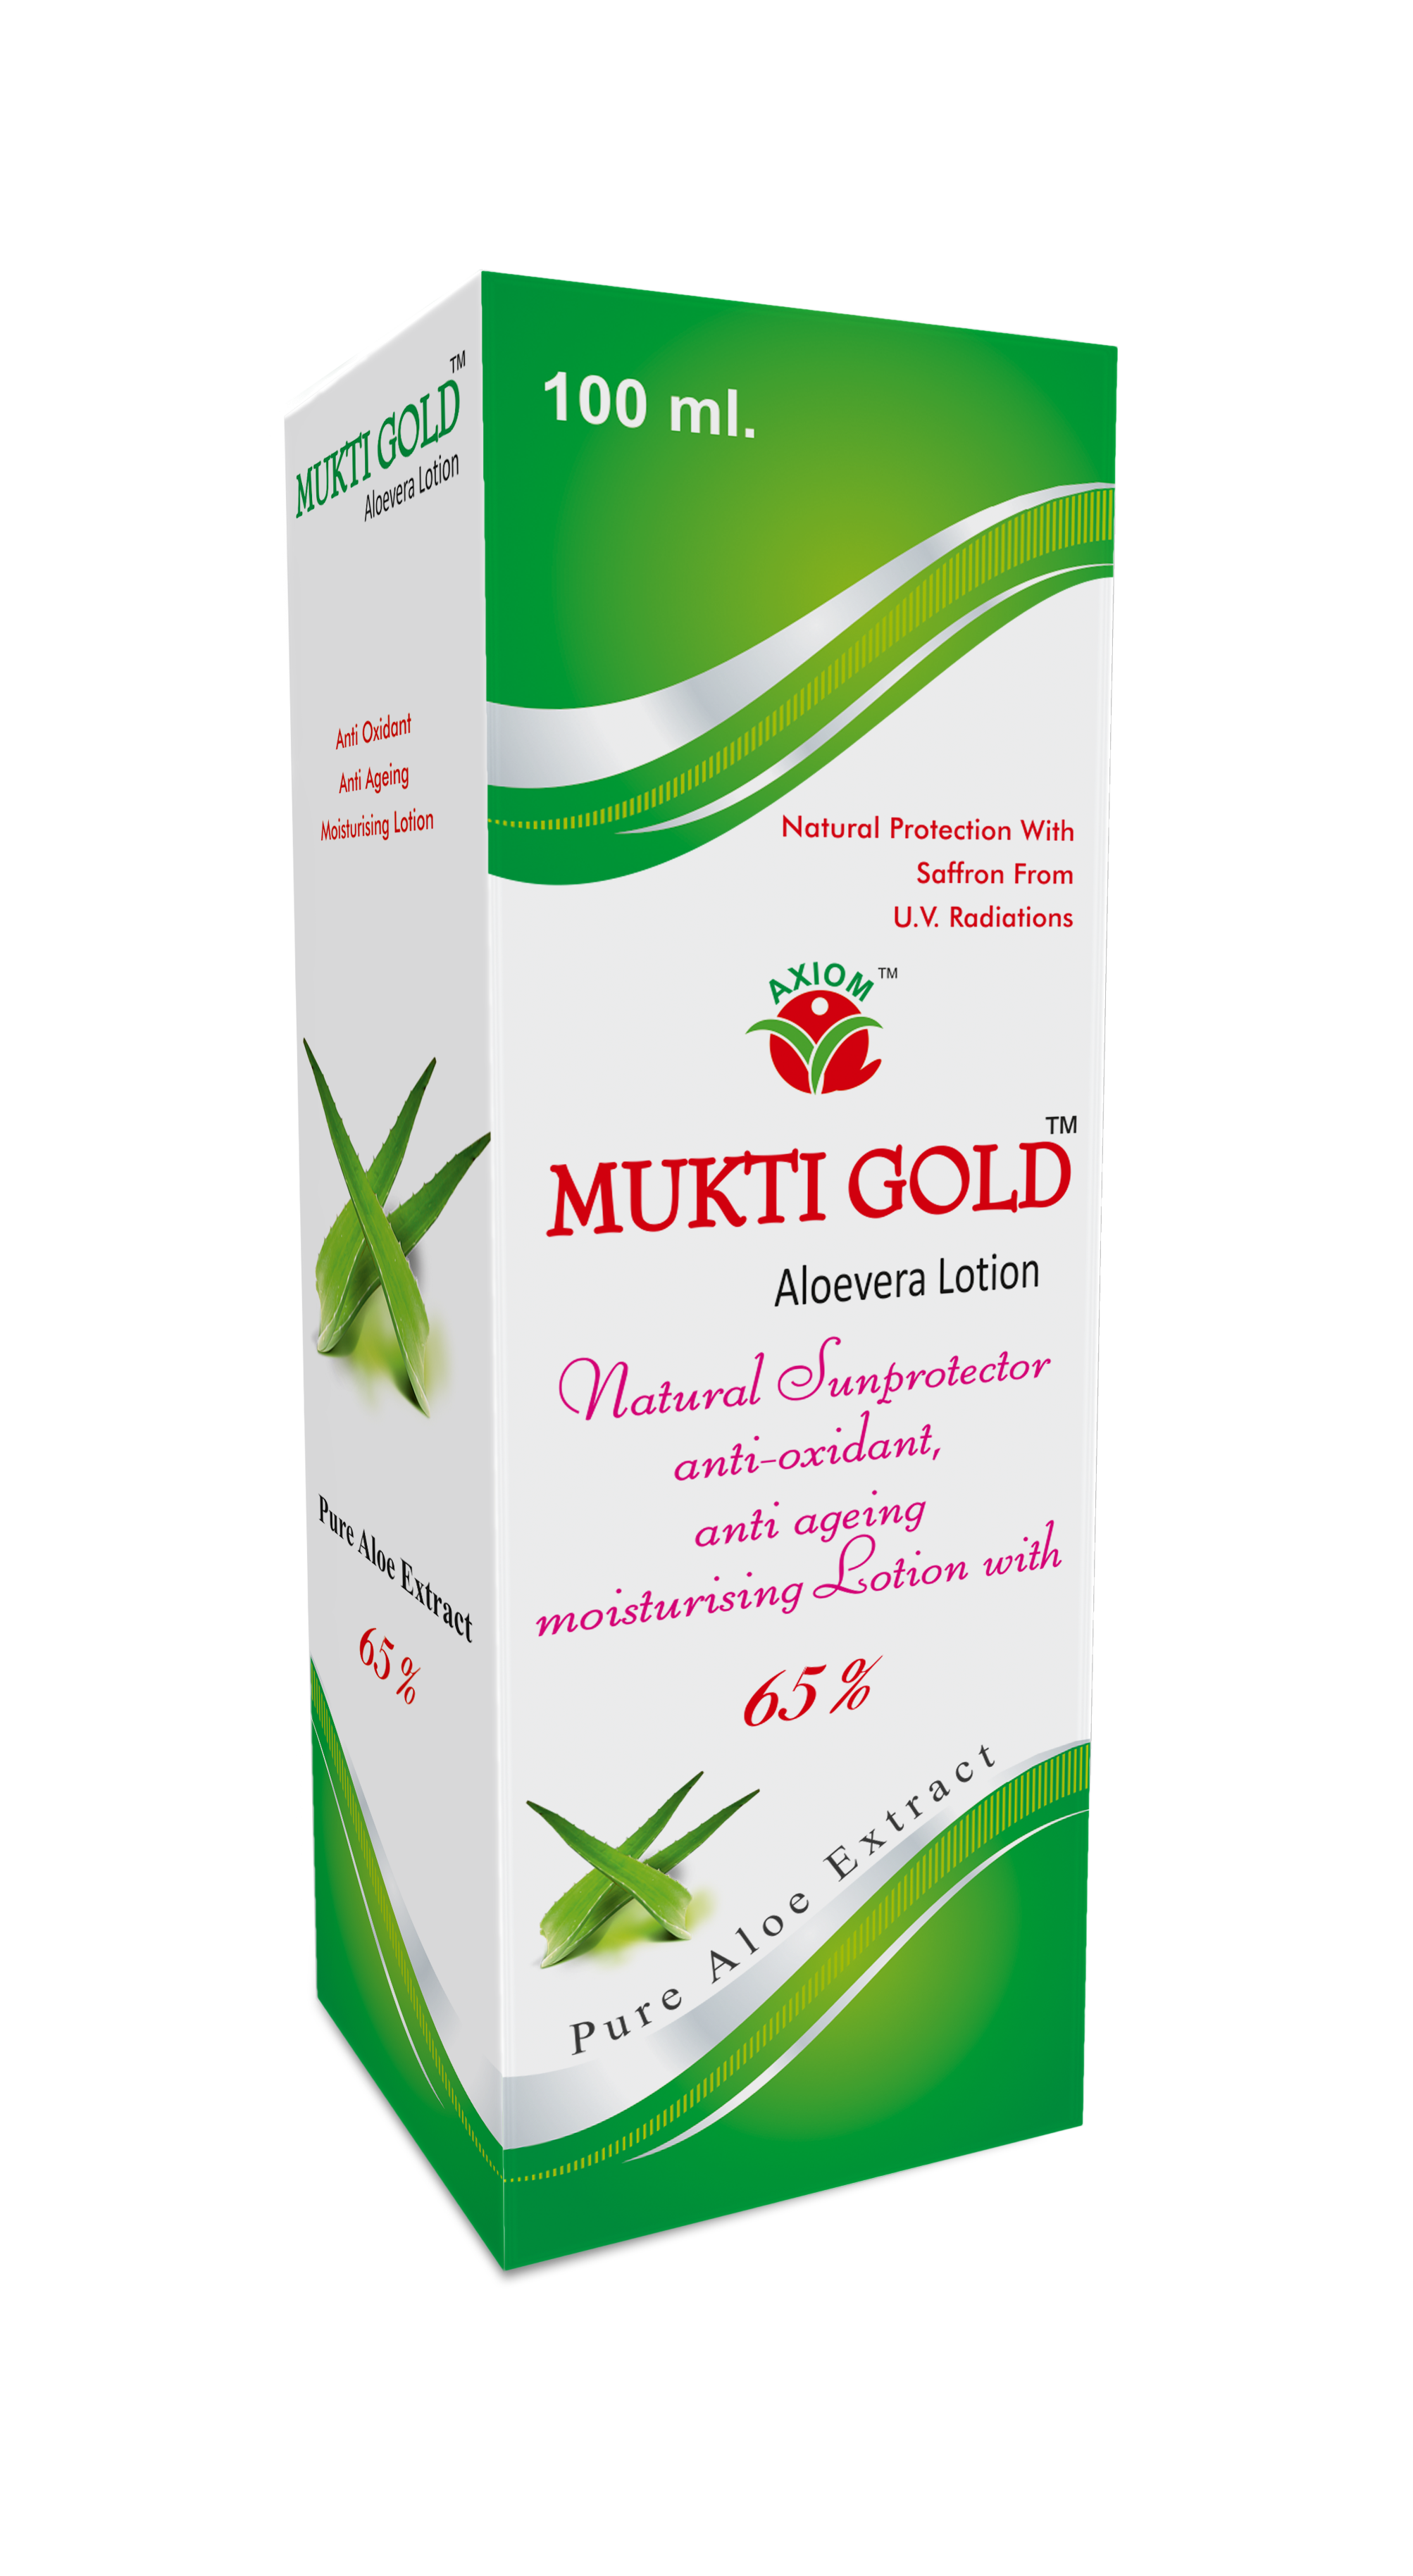 Buy Axiom Mukti Gold Aloevera Lotion at Best Price Online